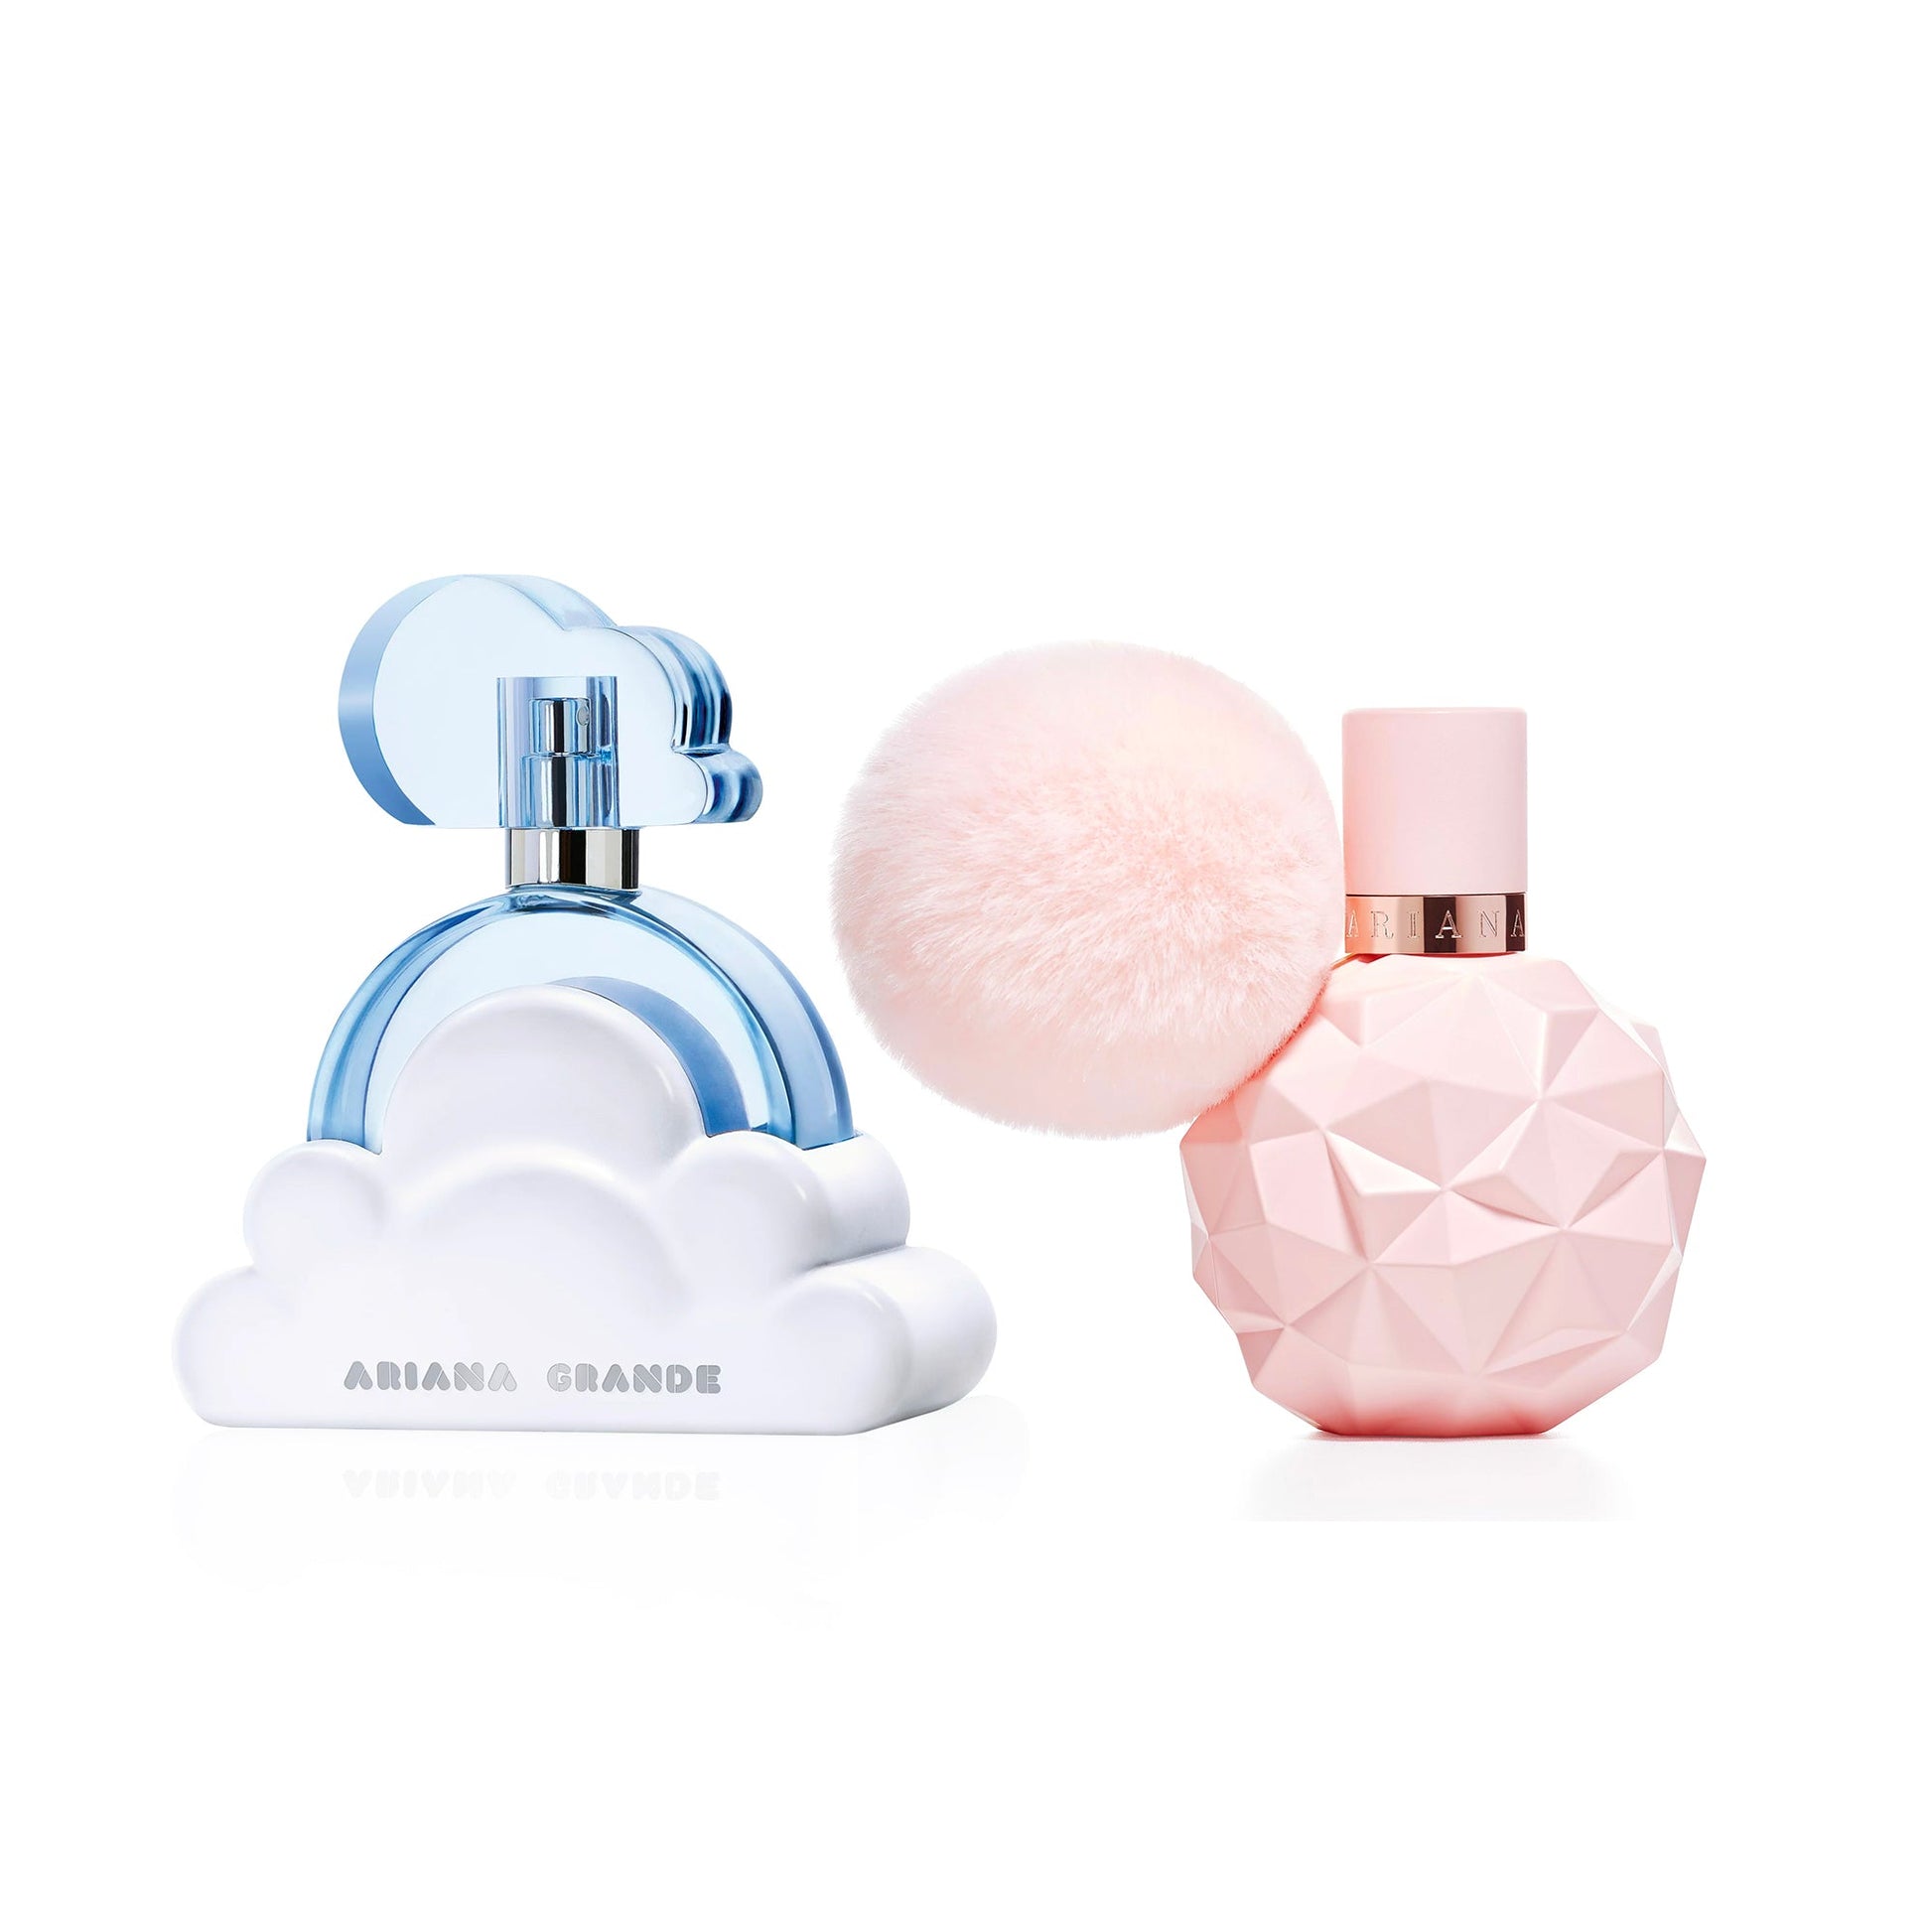 Bundle for Women: Cloud by Ariana Grande and Sweet Like Candy by Ariana Grande, Product image 1